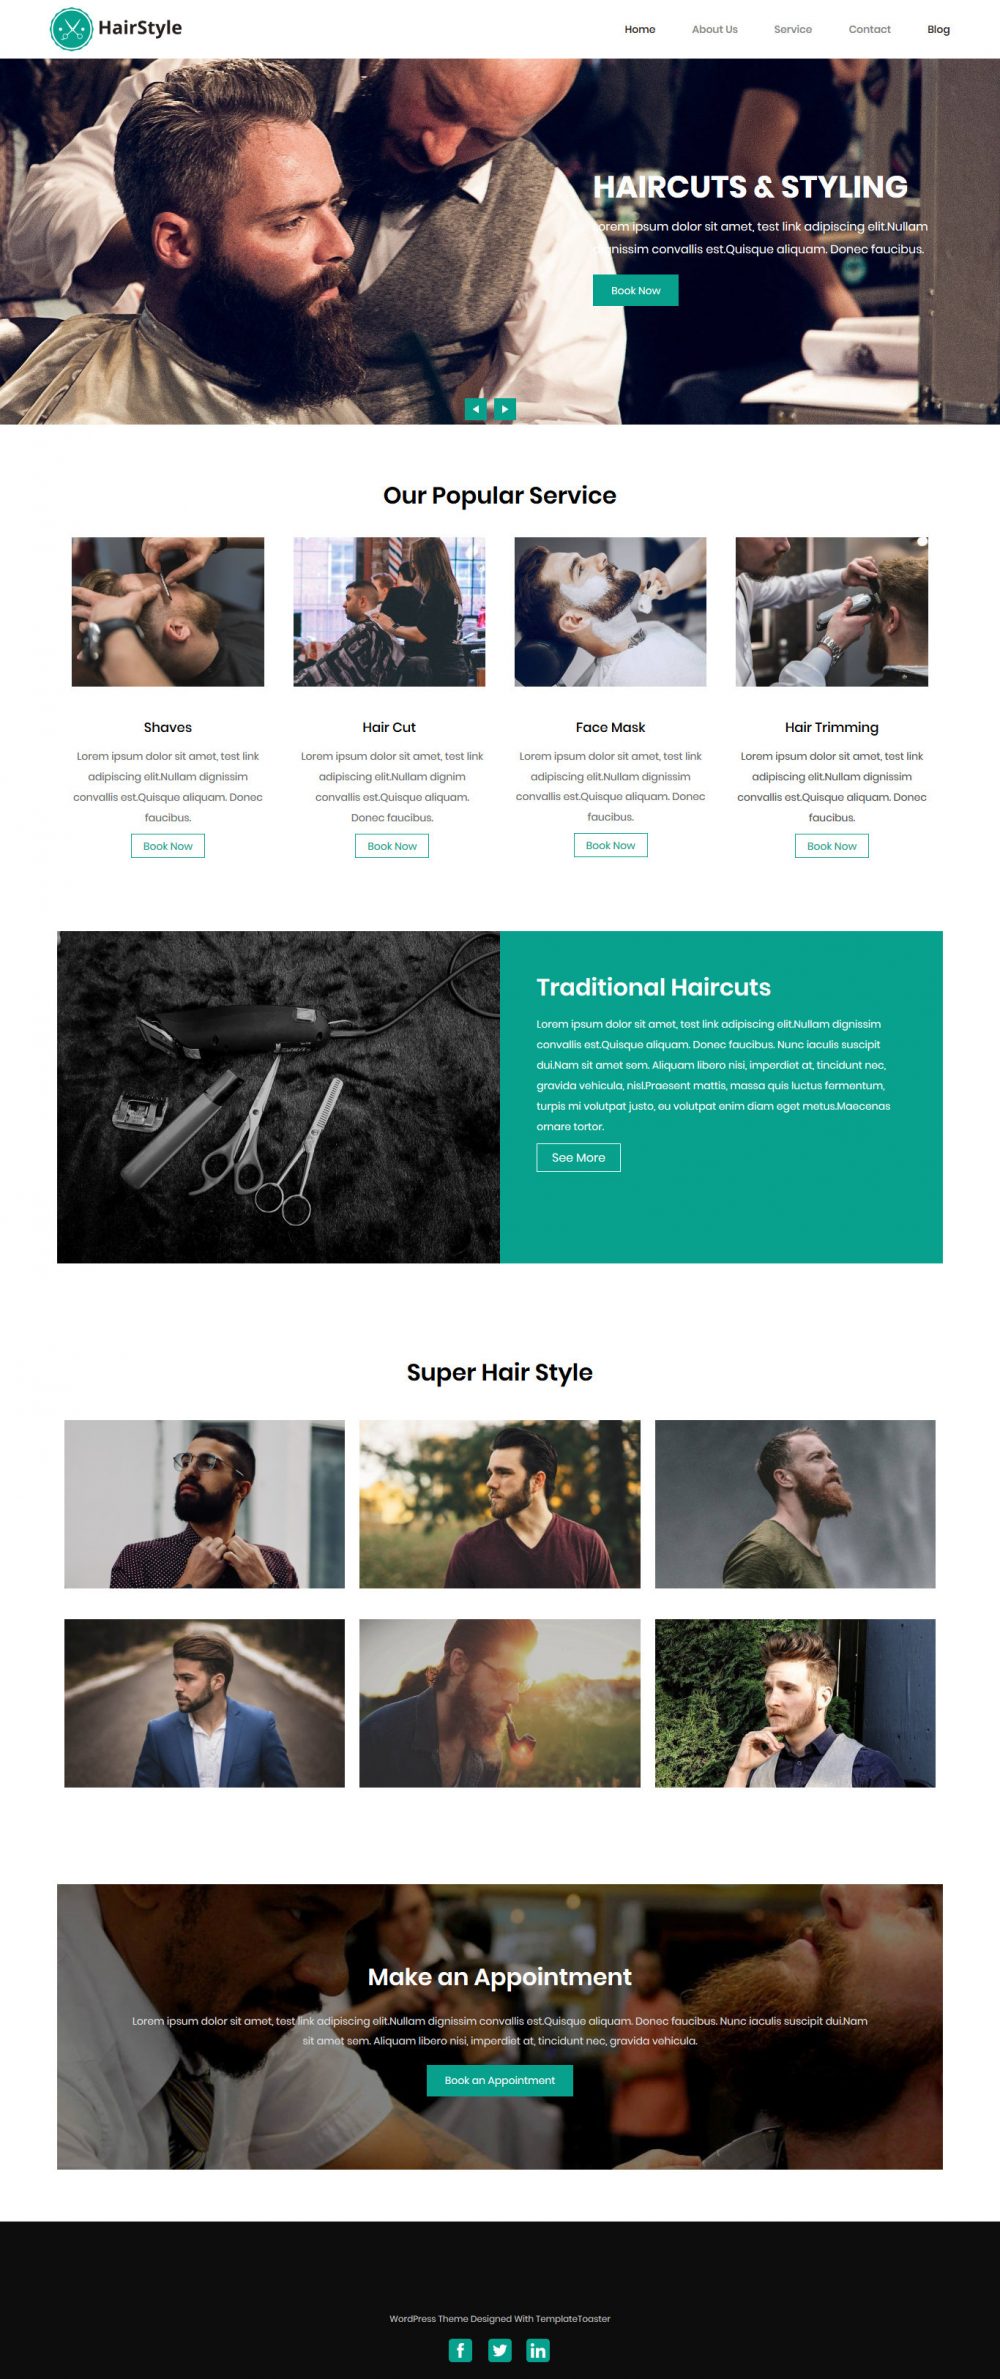 HairStyle Barber Shop Blogger Template